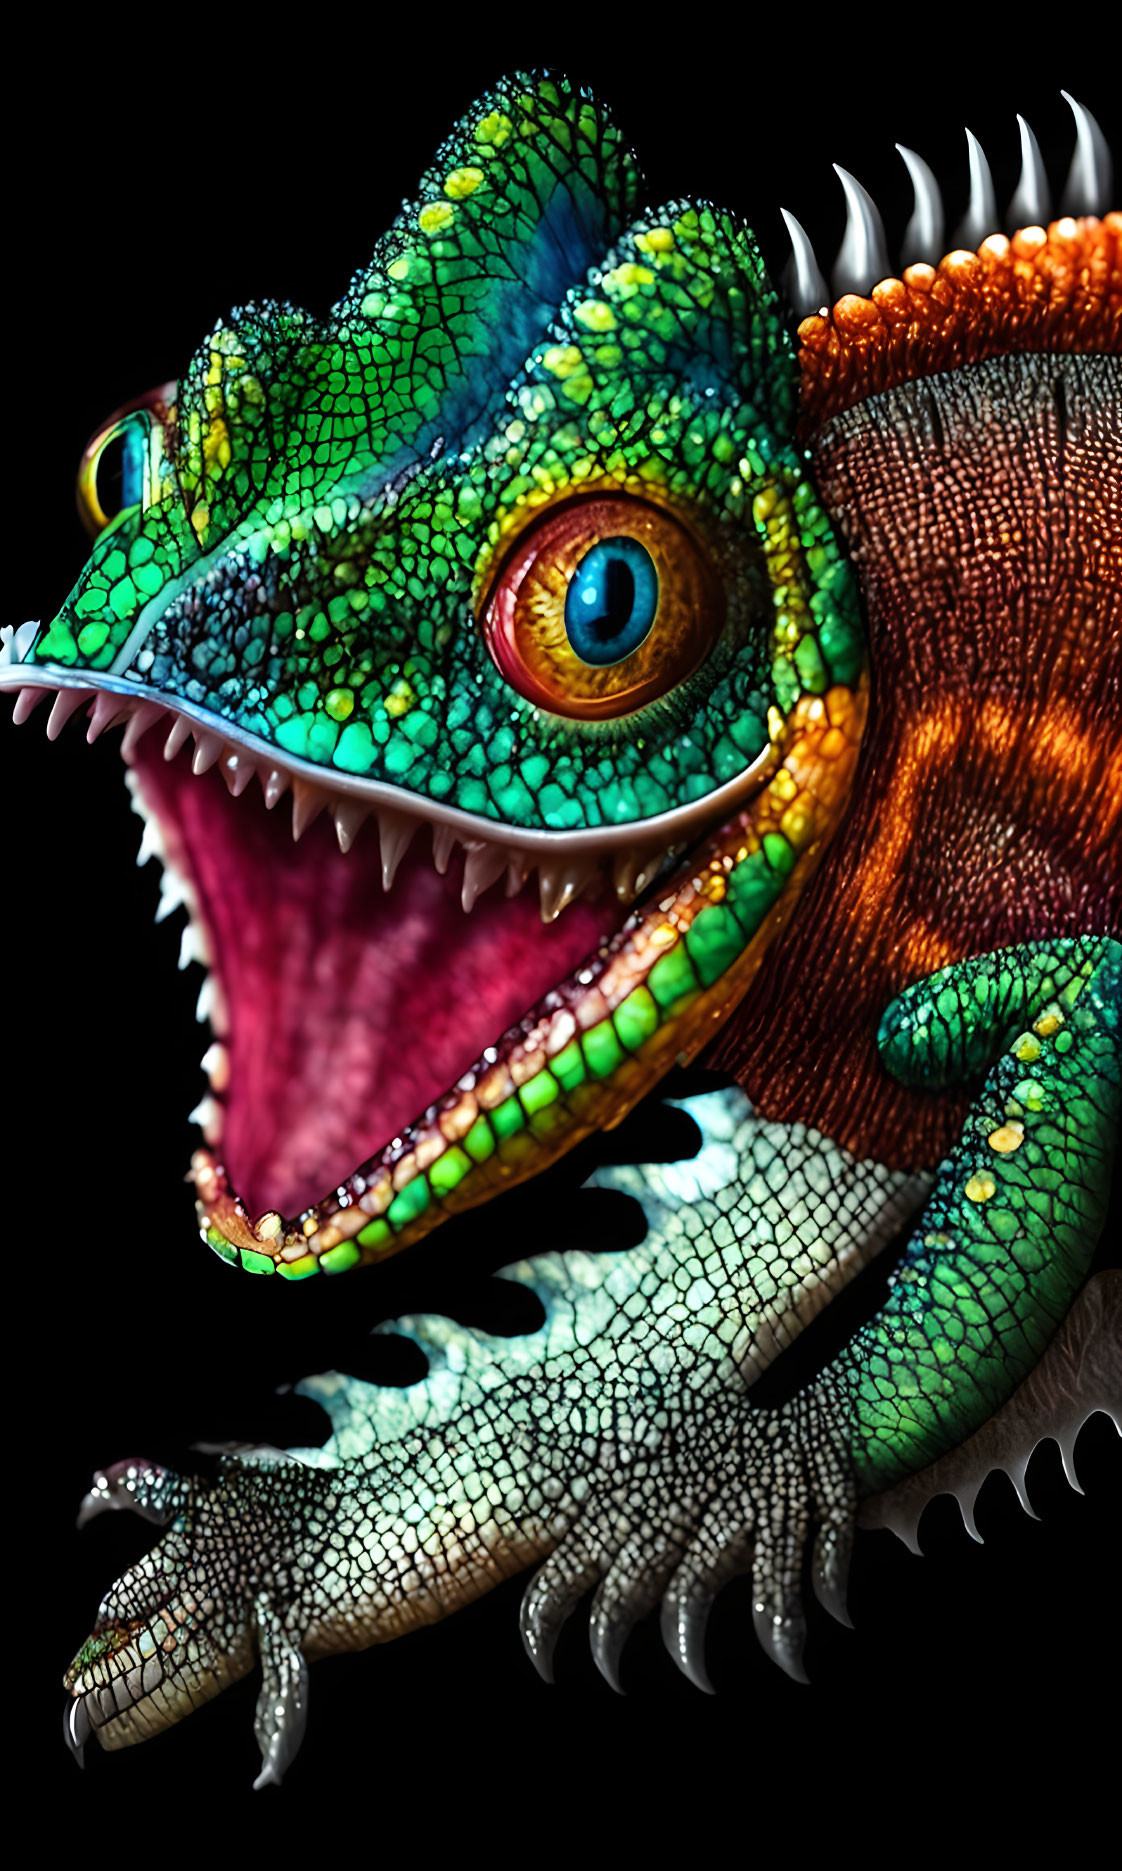 Colorful Chameleon with Open Mouth and Sharp Teeth on Black Background